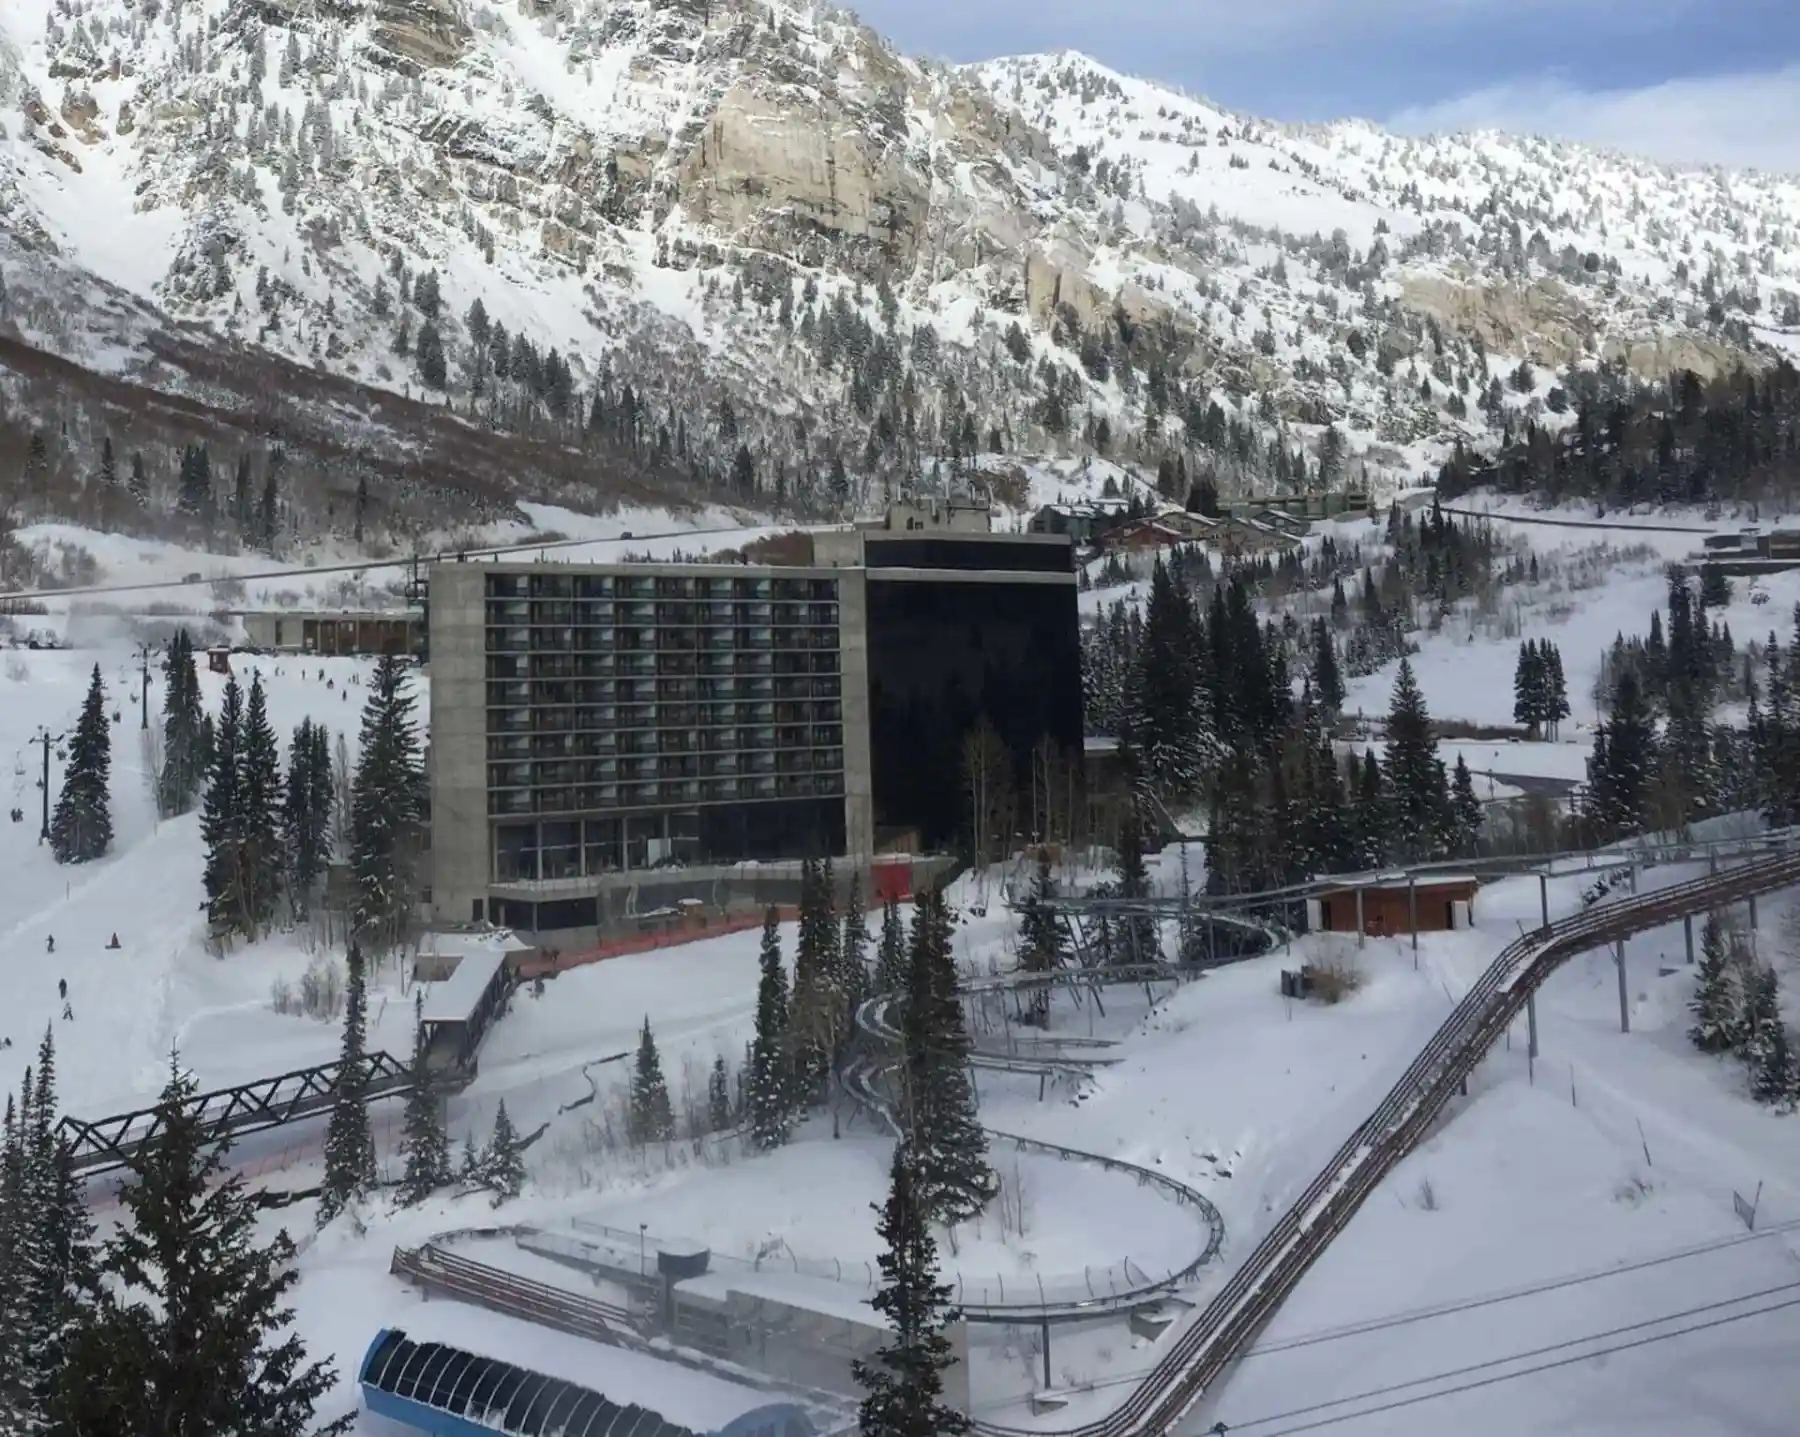 View of the Cliff Lodge from the Snowbird tram